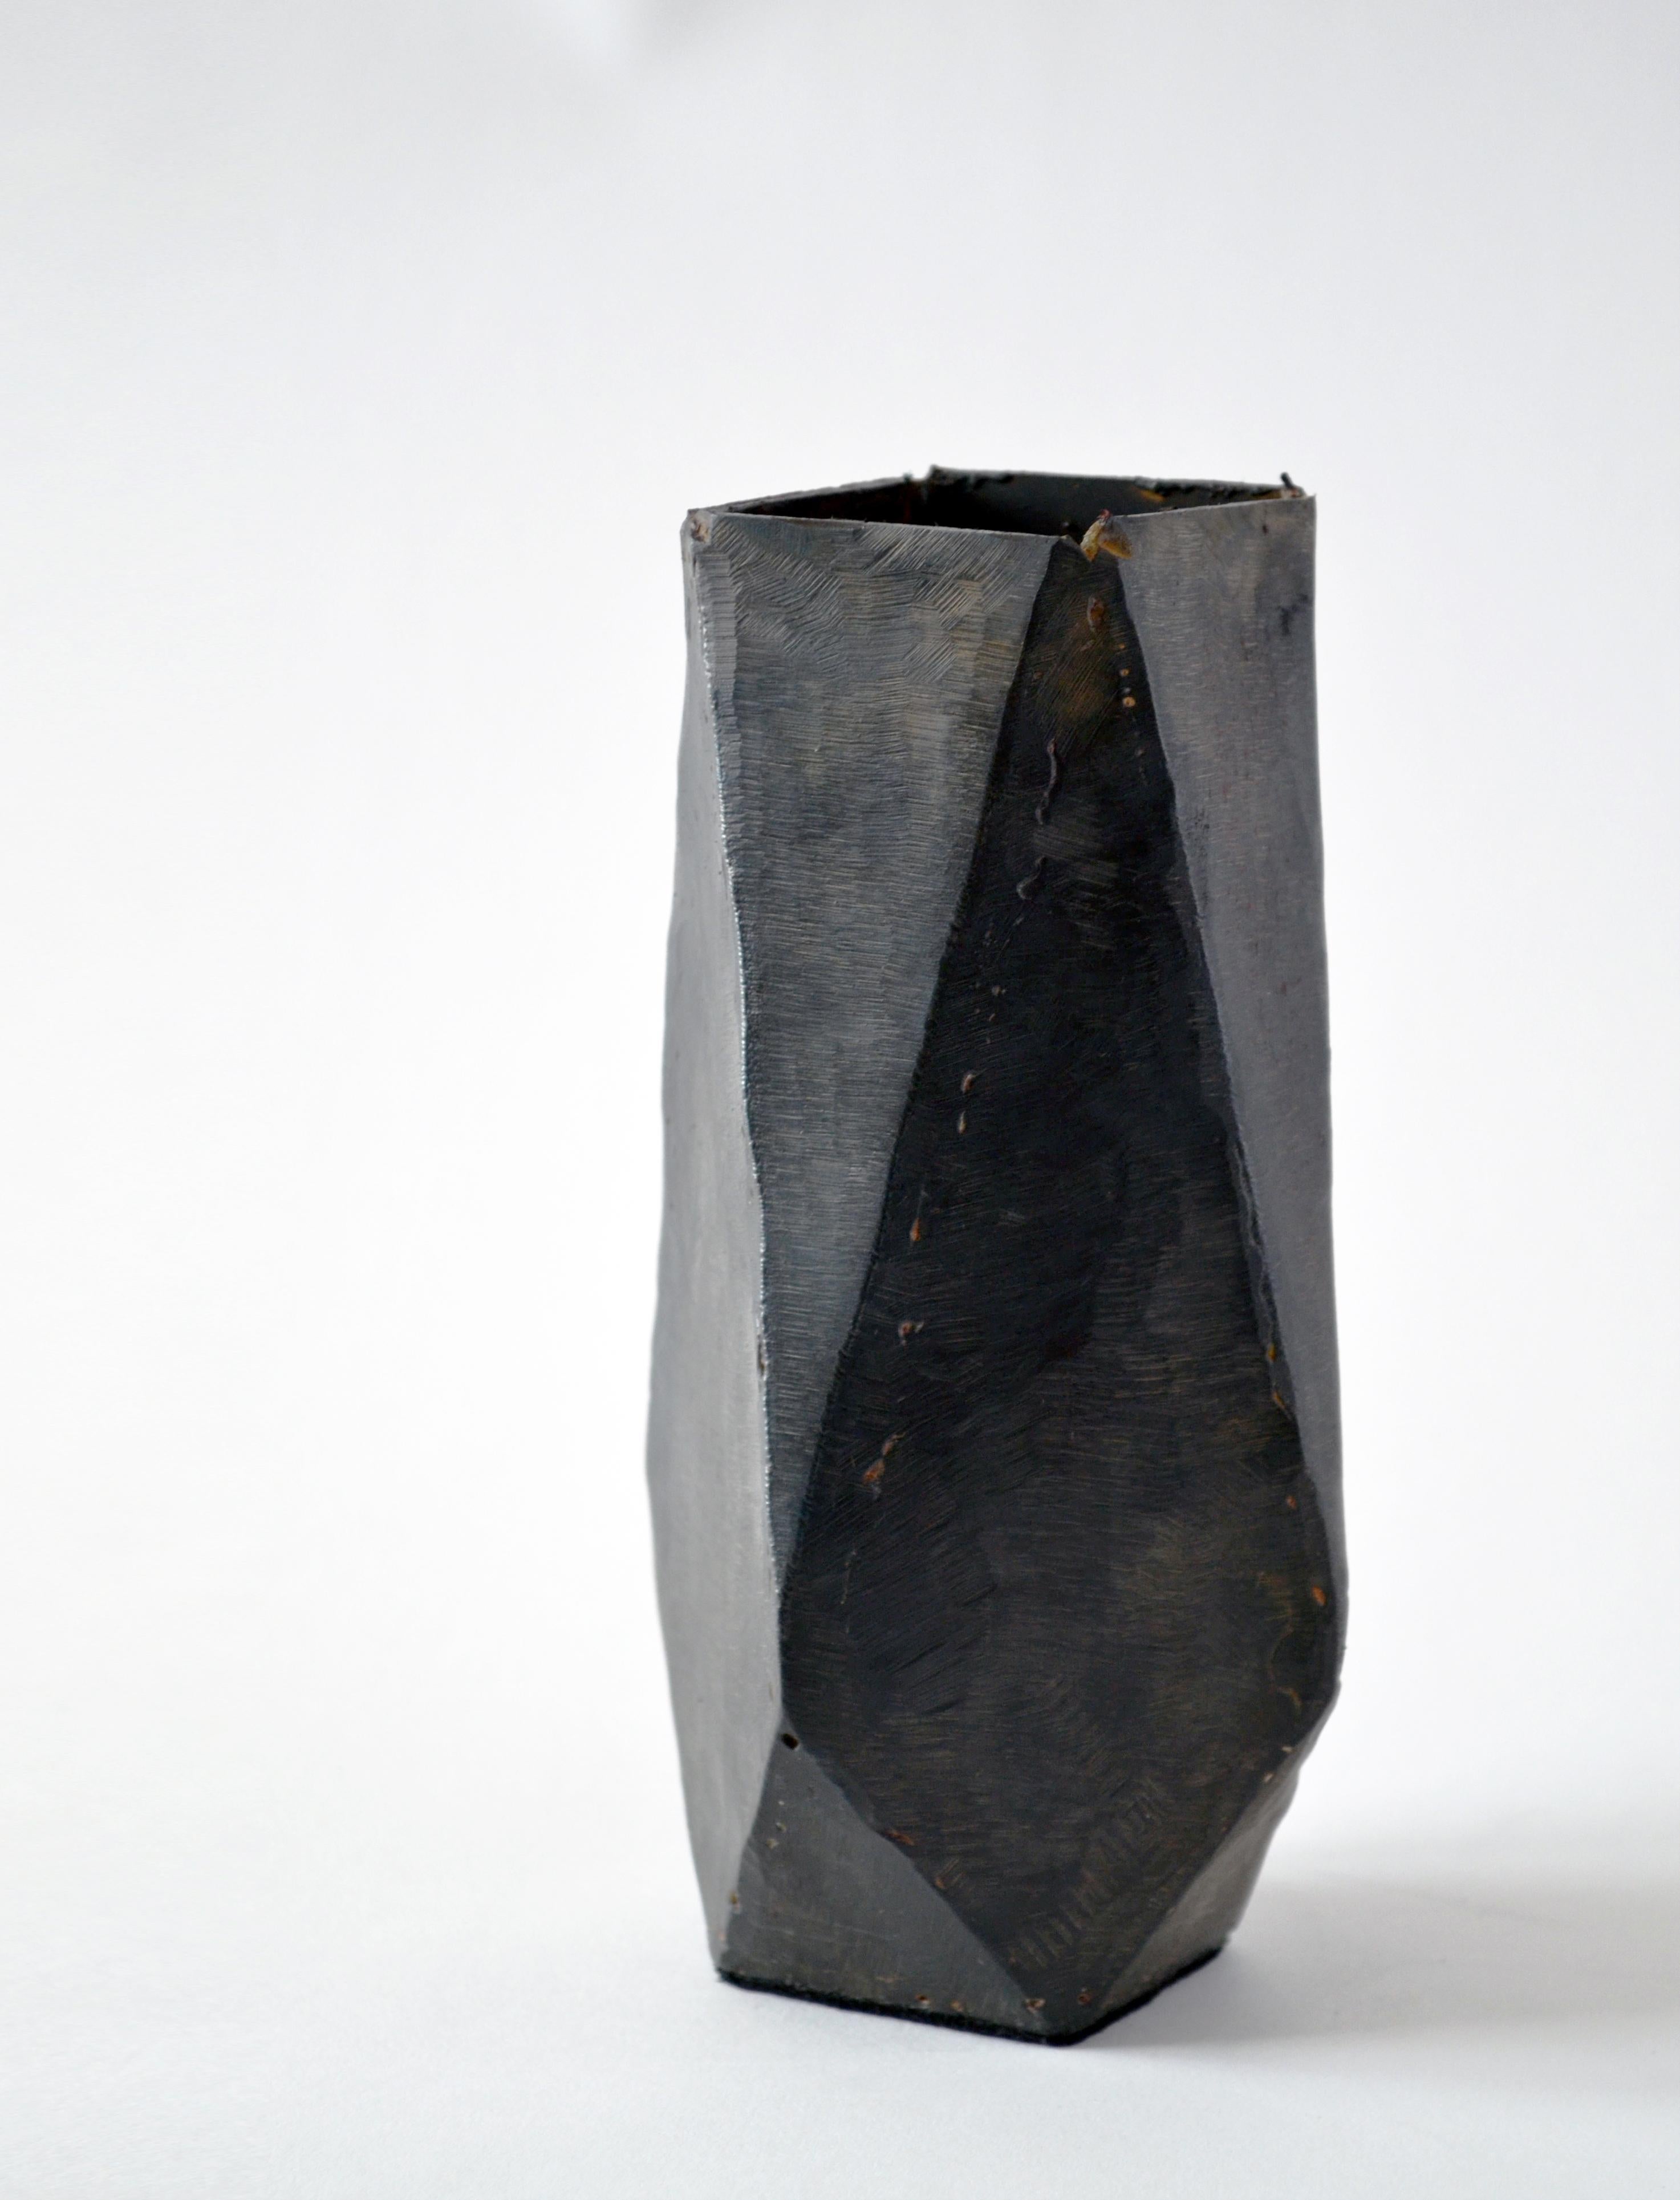 Vessel No 6.
J.M. Szymanski
d. 2017
Blackened and waxed iron

This is a unique architectural object made entirely of iron. J.M. Szymanski uses a unique process of metal sculpting to achieve these dynamic facets. It is finished in a black wax.